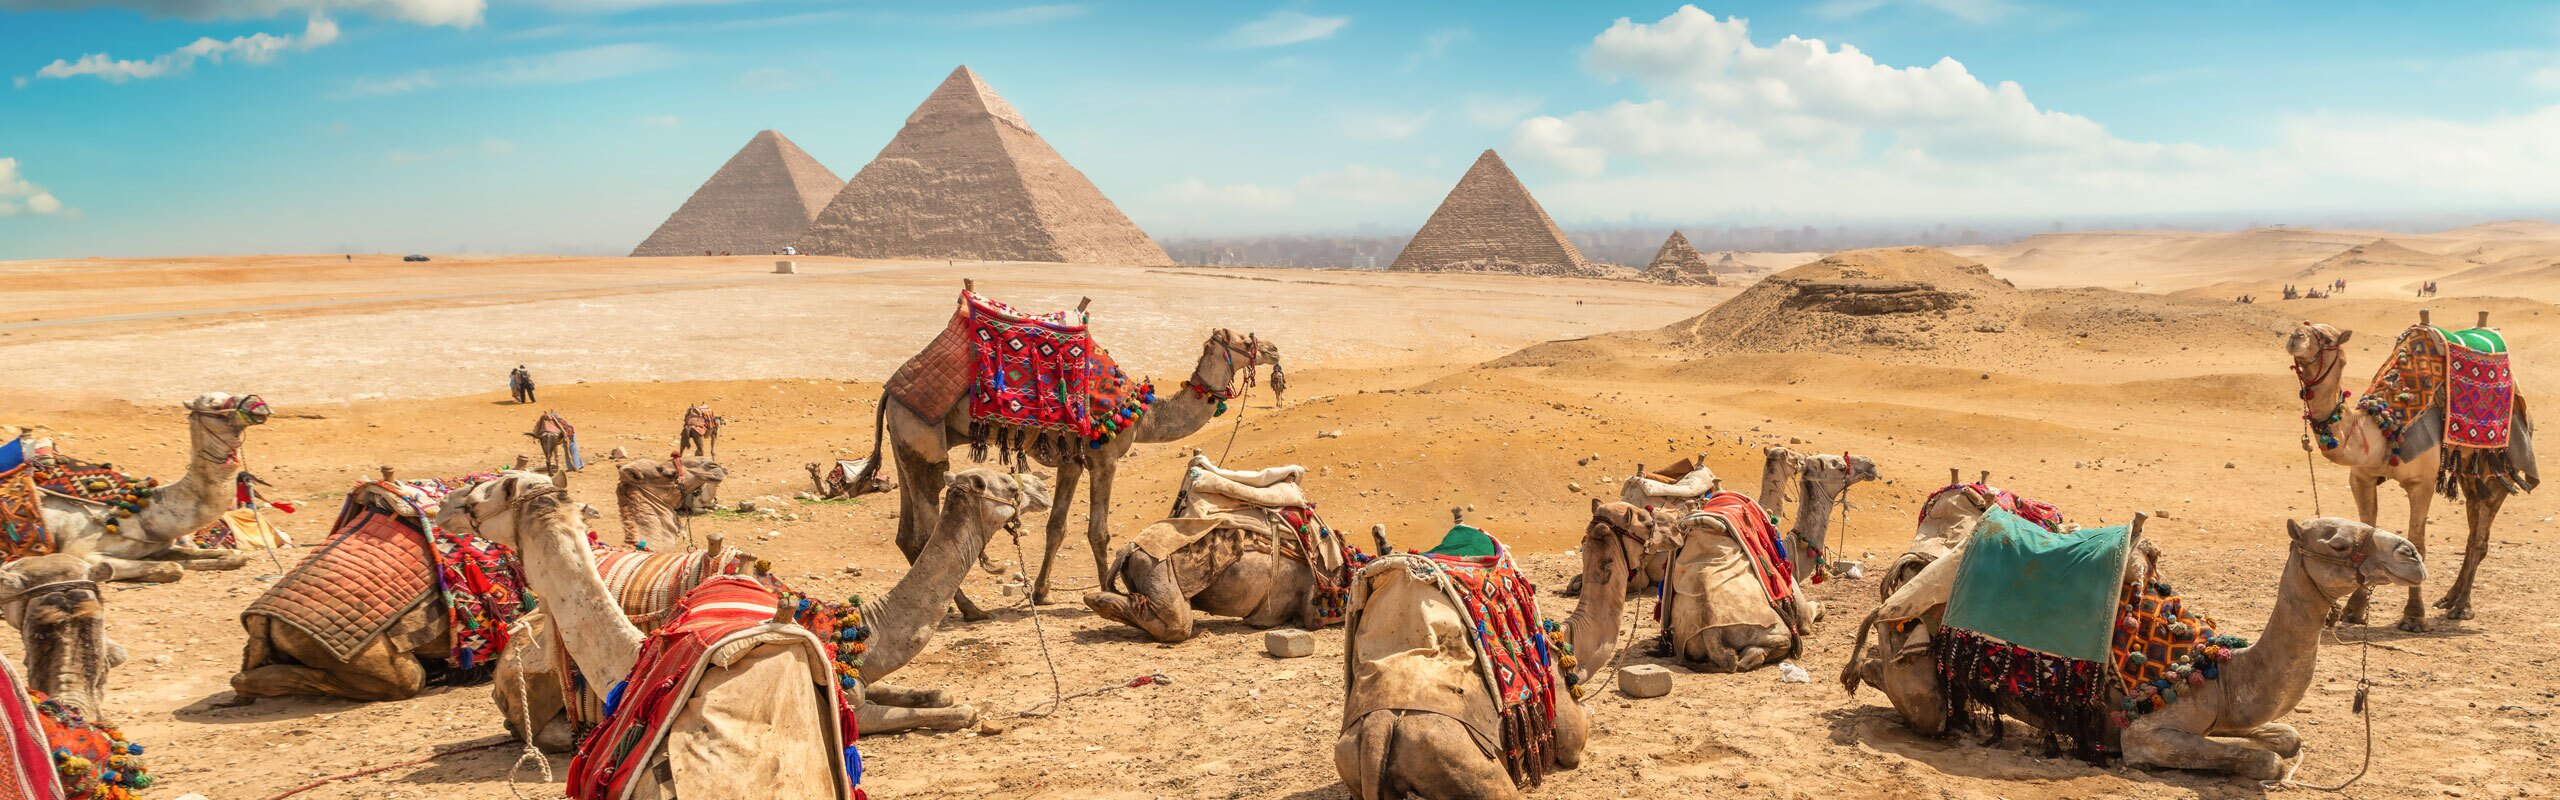 10-Day Family Holiday in Egypt